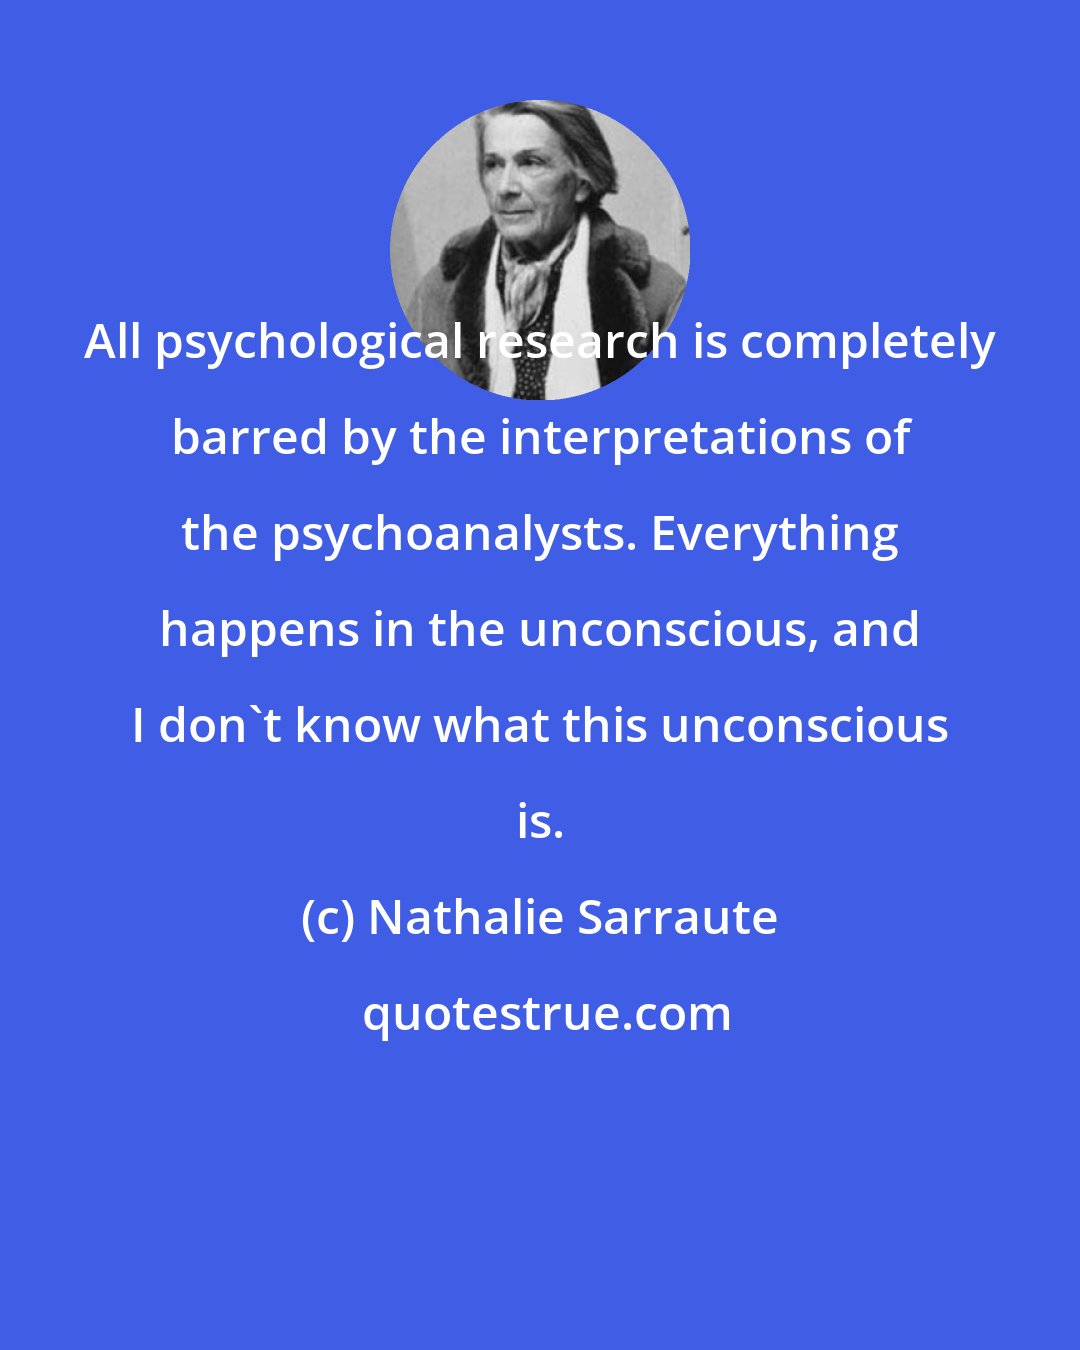 Nathalie Sarraute: All psychological research is completely barred by the interpretations of the psychoanalysts. Everything happens in the unconscious, and I don't know what this unconscious is.